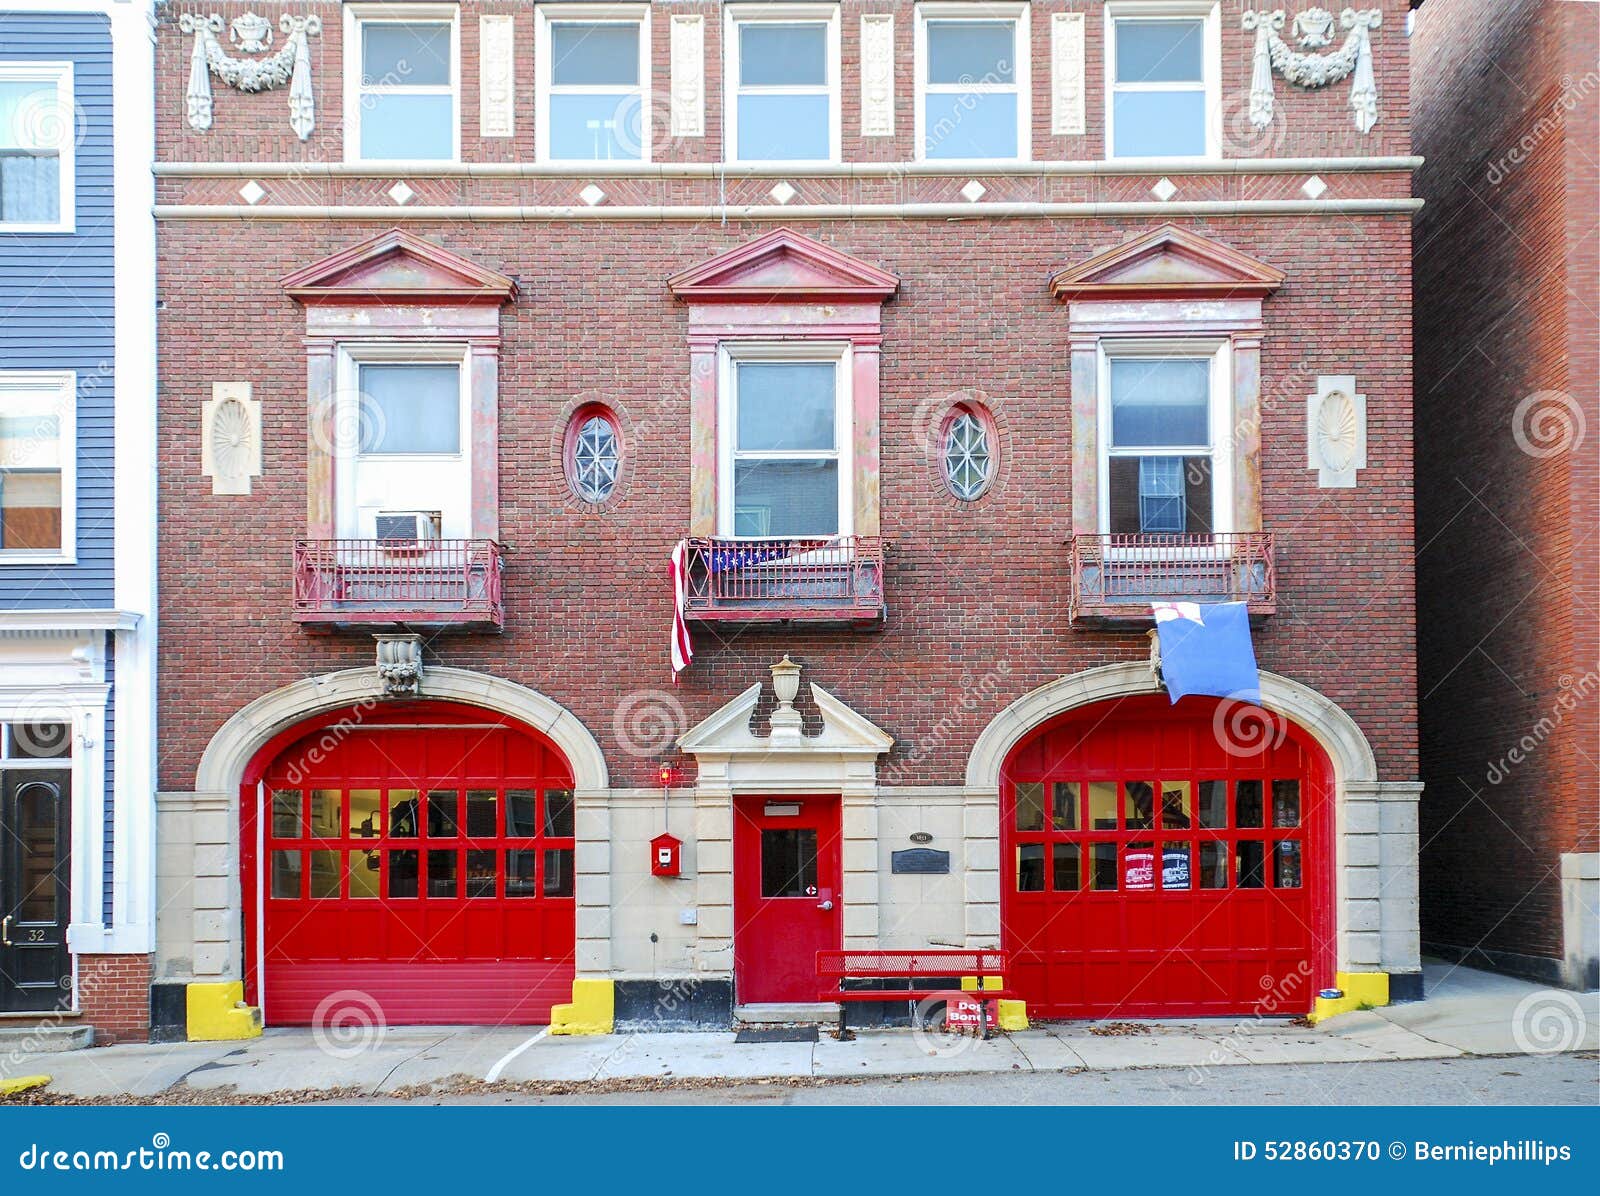 historic firehouse red doors